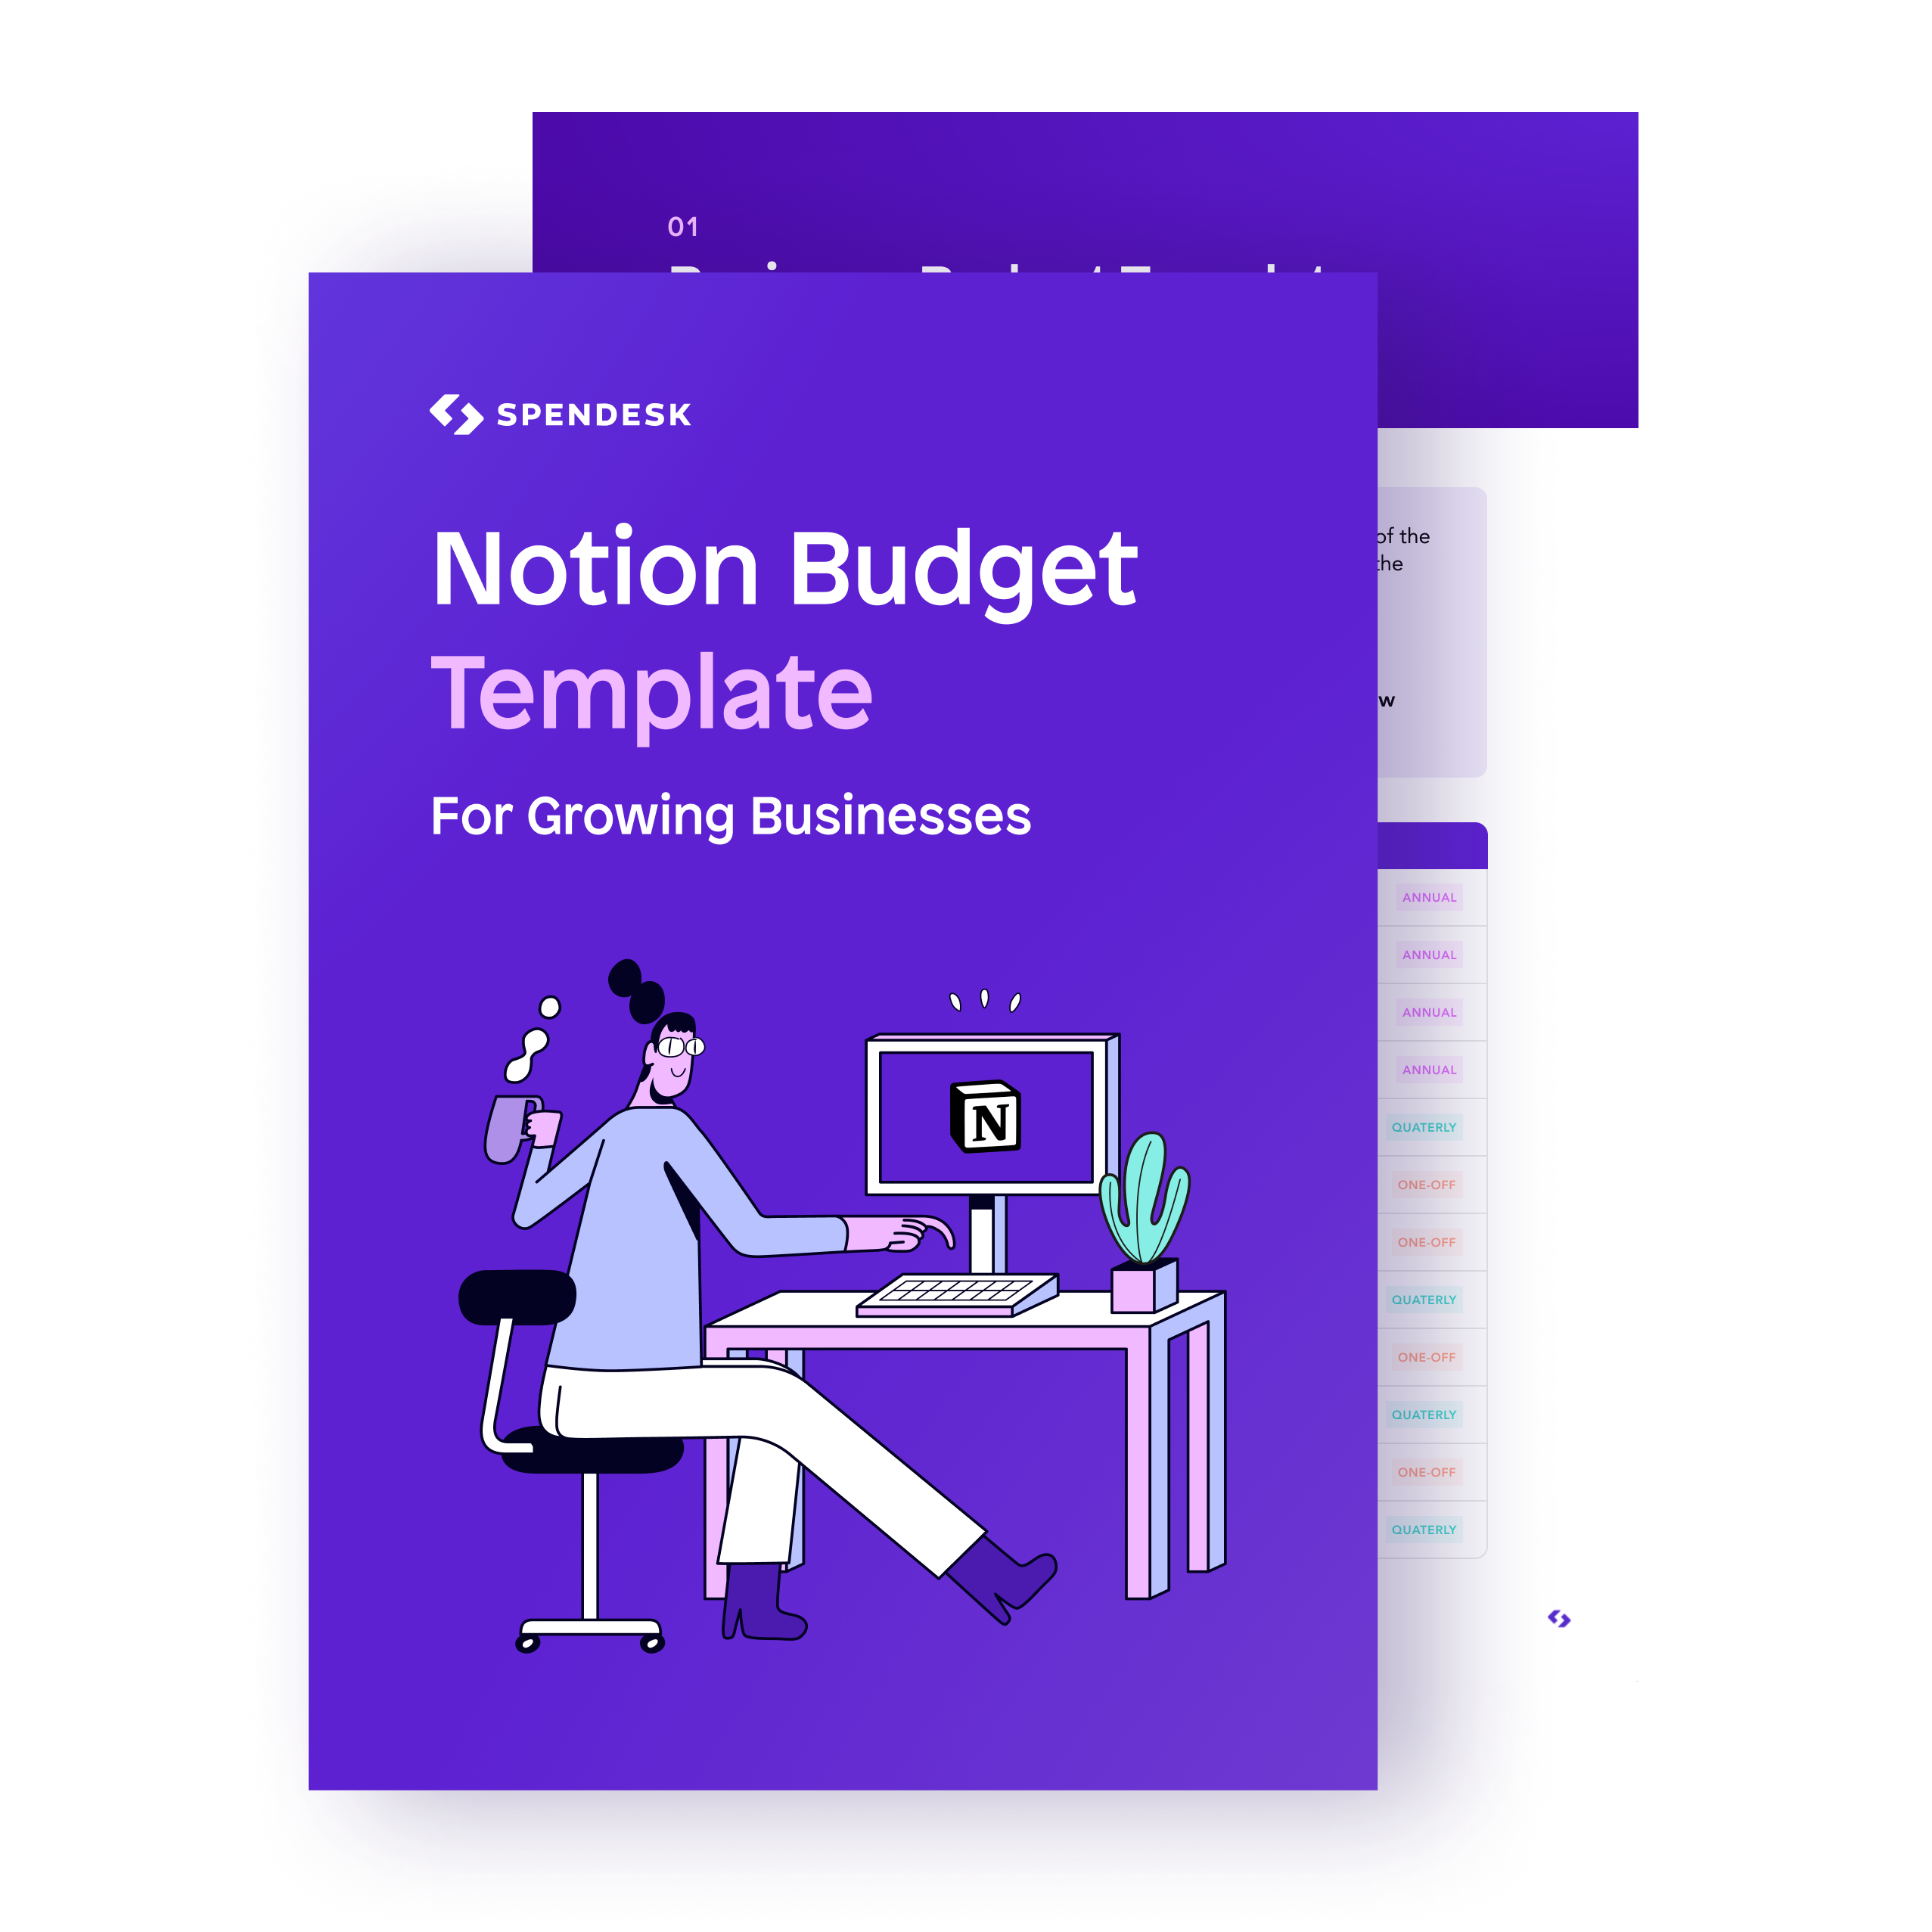 [TEMPLATE] Notion Budget cover